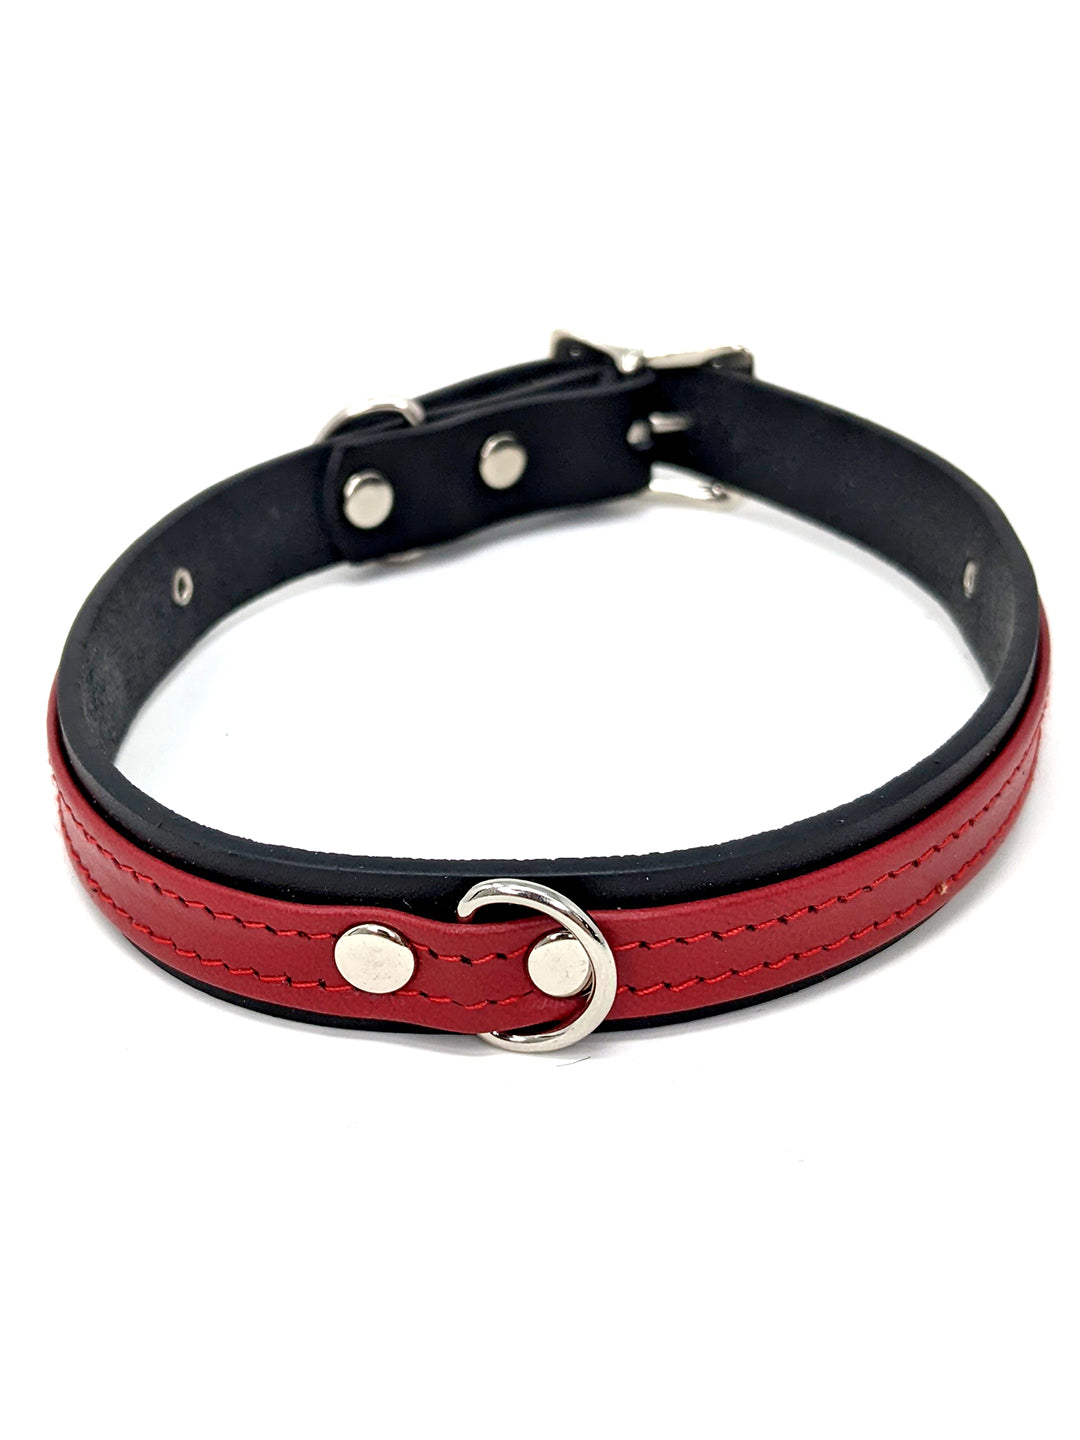 Leather Collar With Centre D Ring